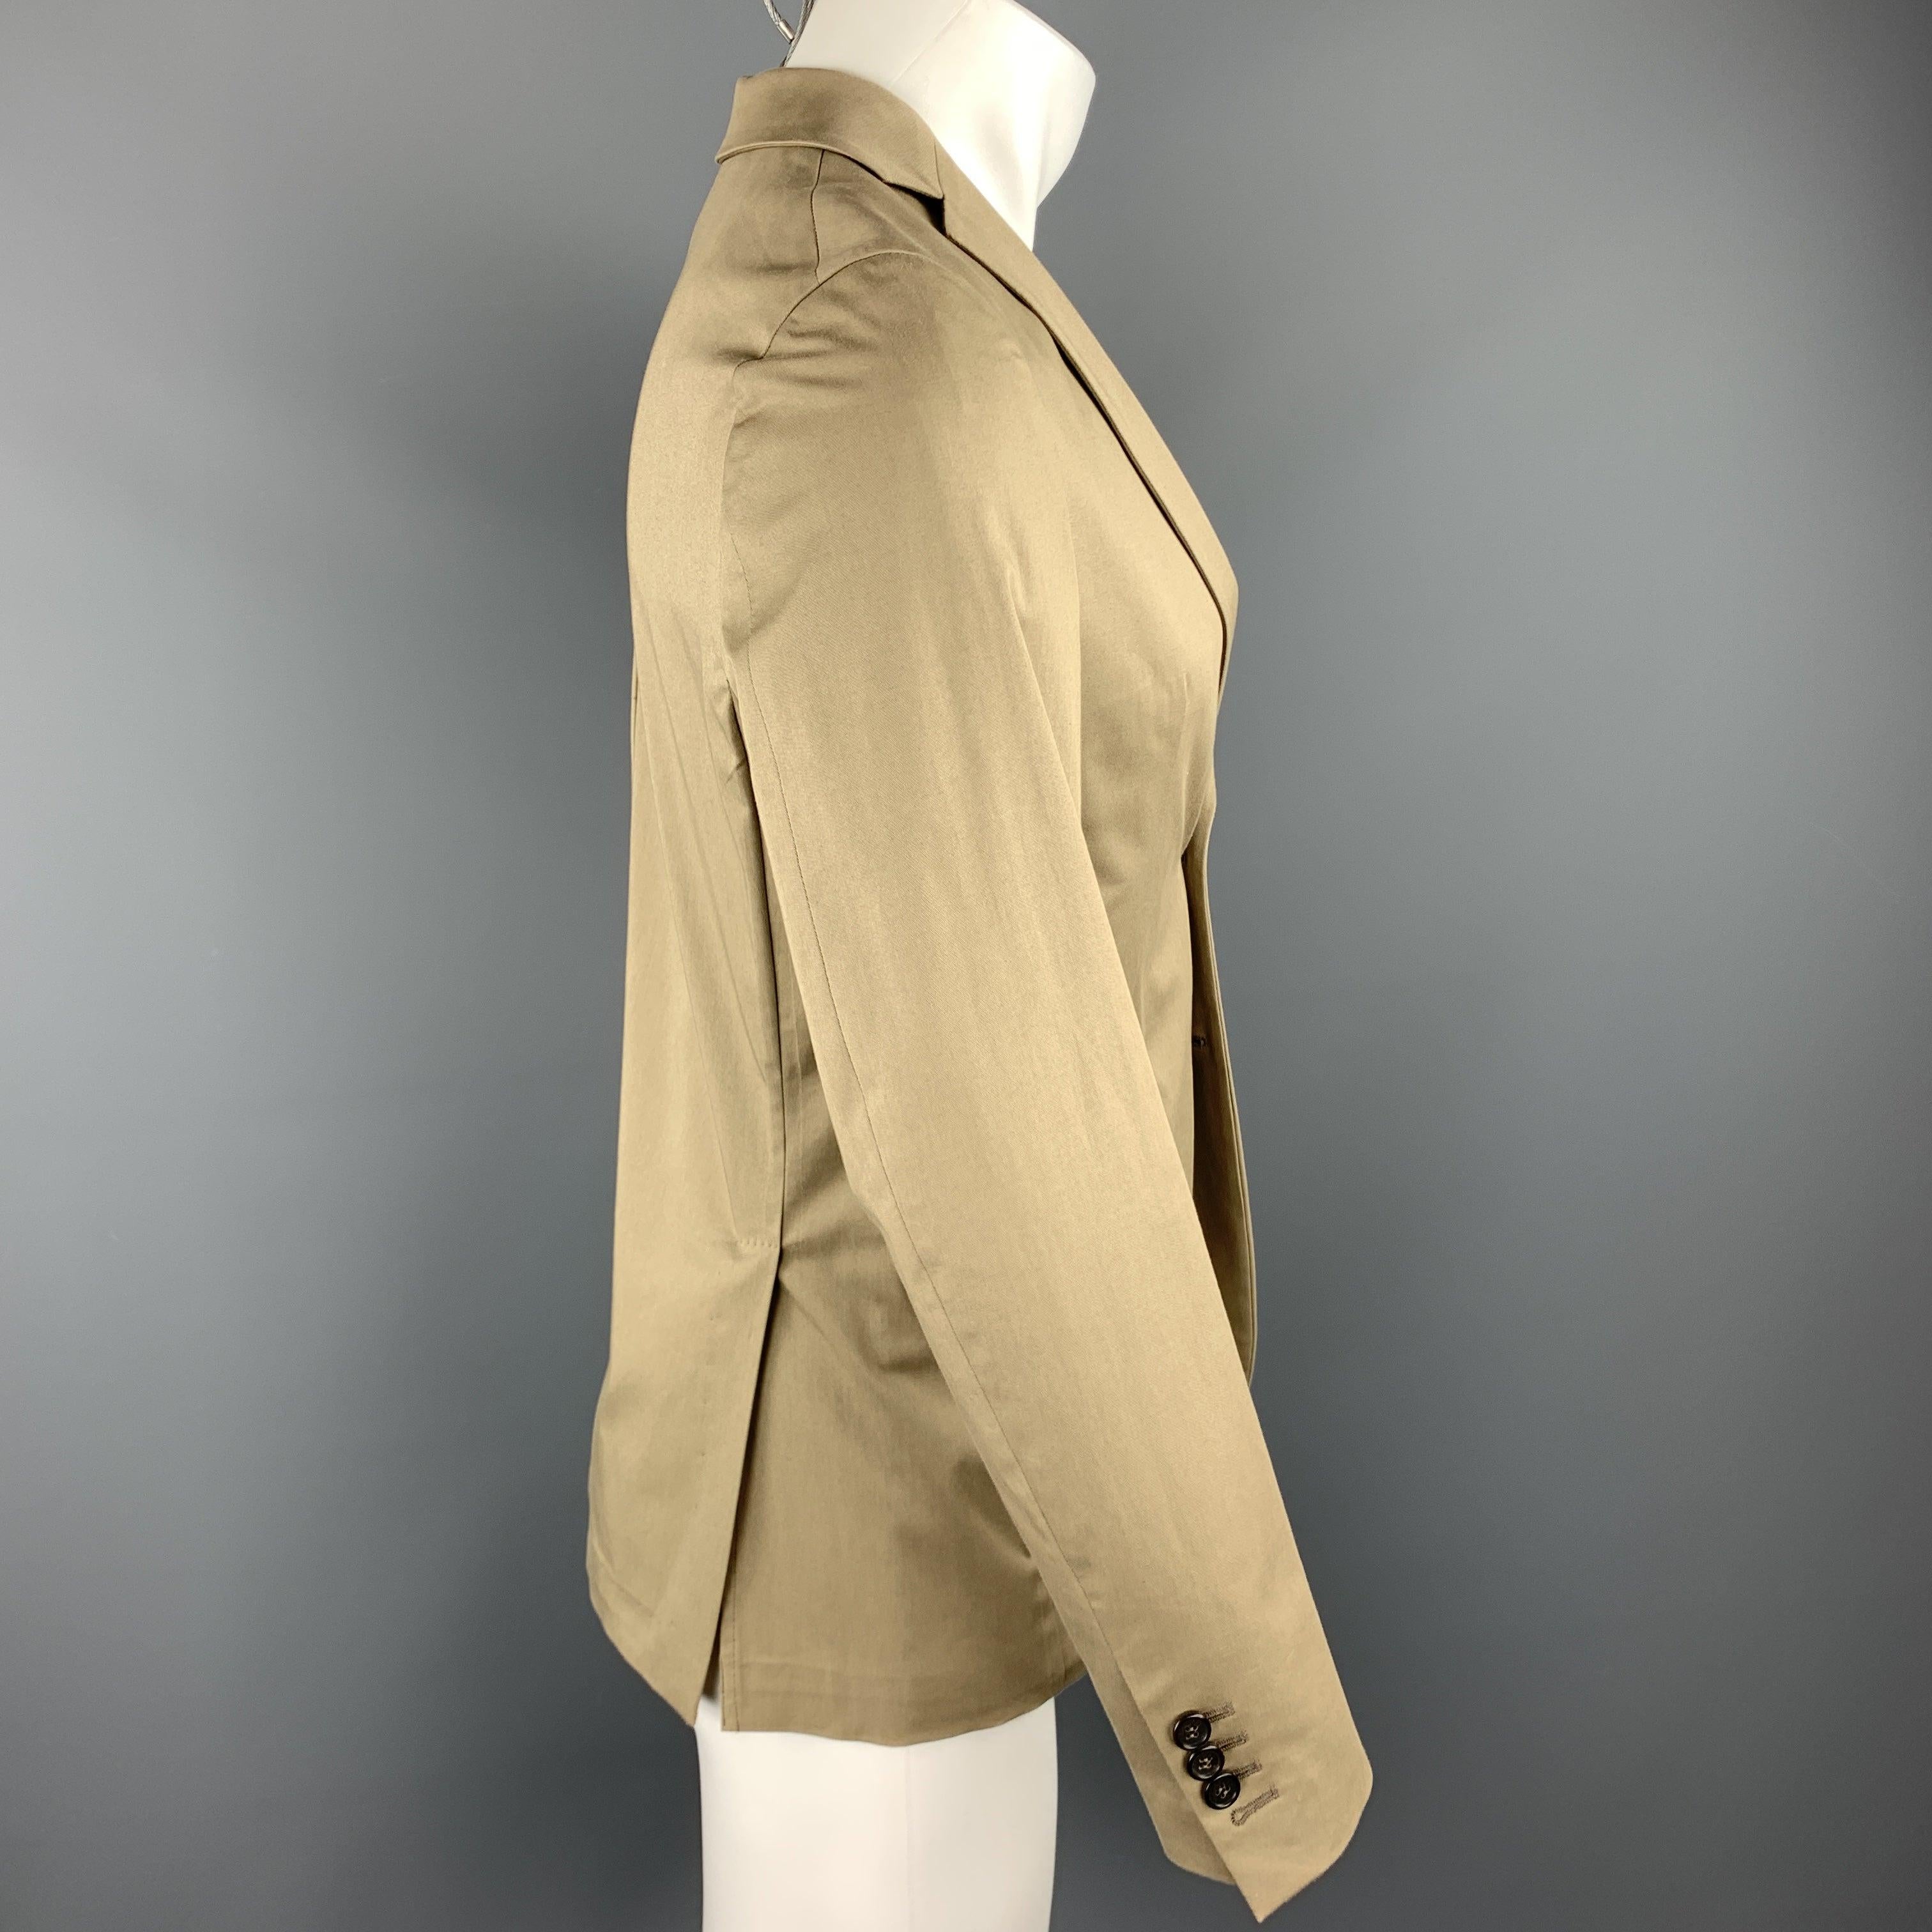 DSQUARED2 sport coat comes in a taupe cotton blend featuring a notch lapel style, flap pockets, and a two button closure. Made in Italy.Excellent
Pre-Owned Condition. 

Marked:   IT 46 

Measurements: 
 
Shoulder: 17 inches 
Chest: 38 inches